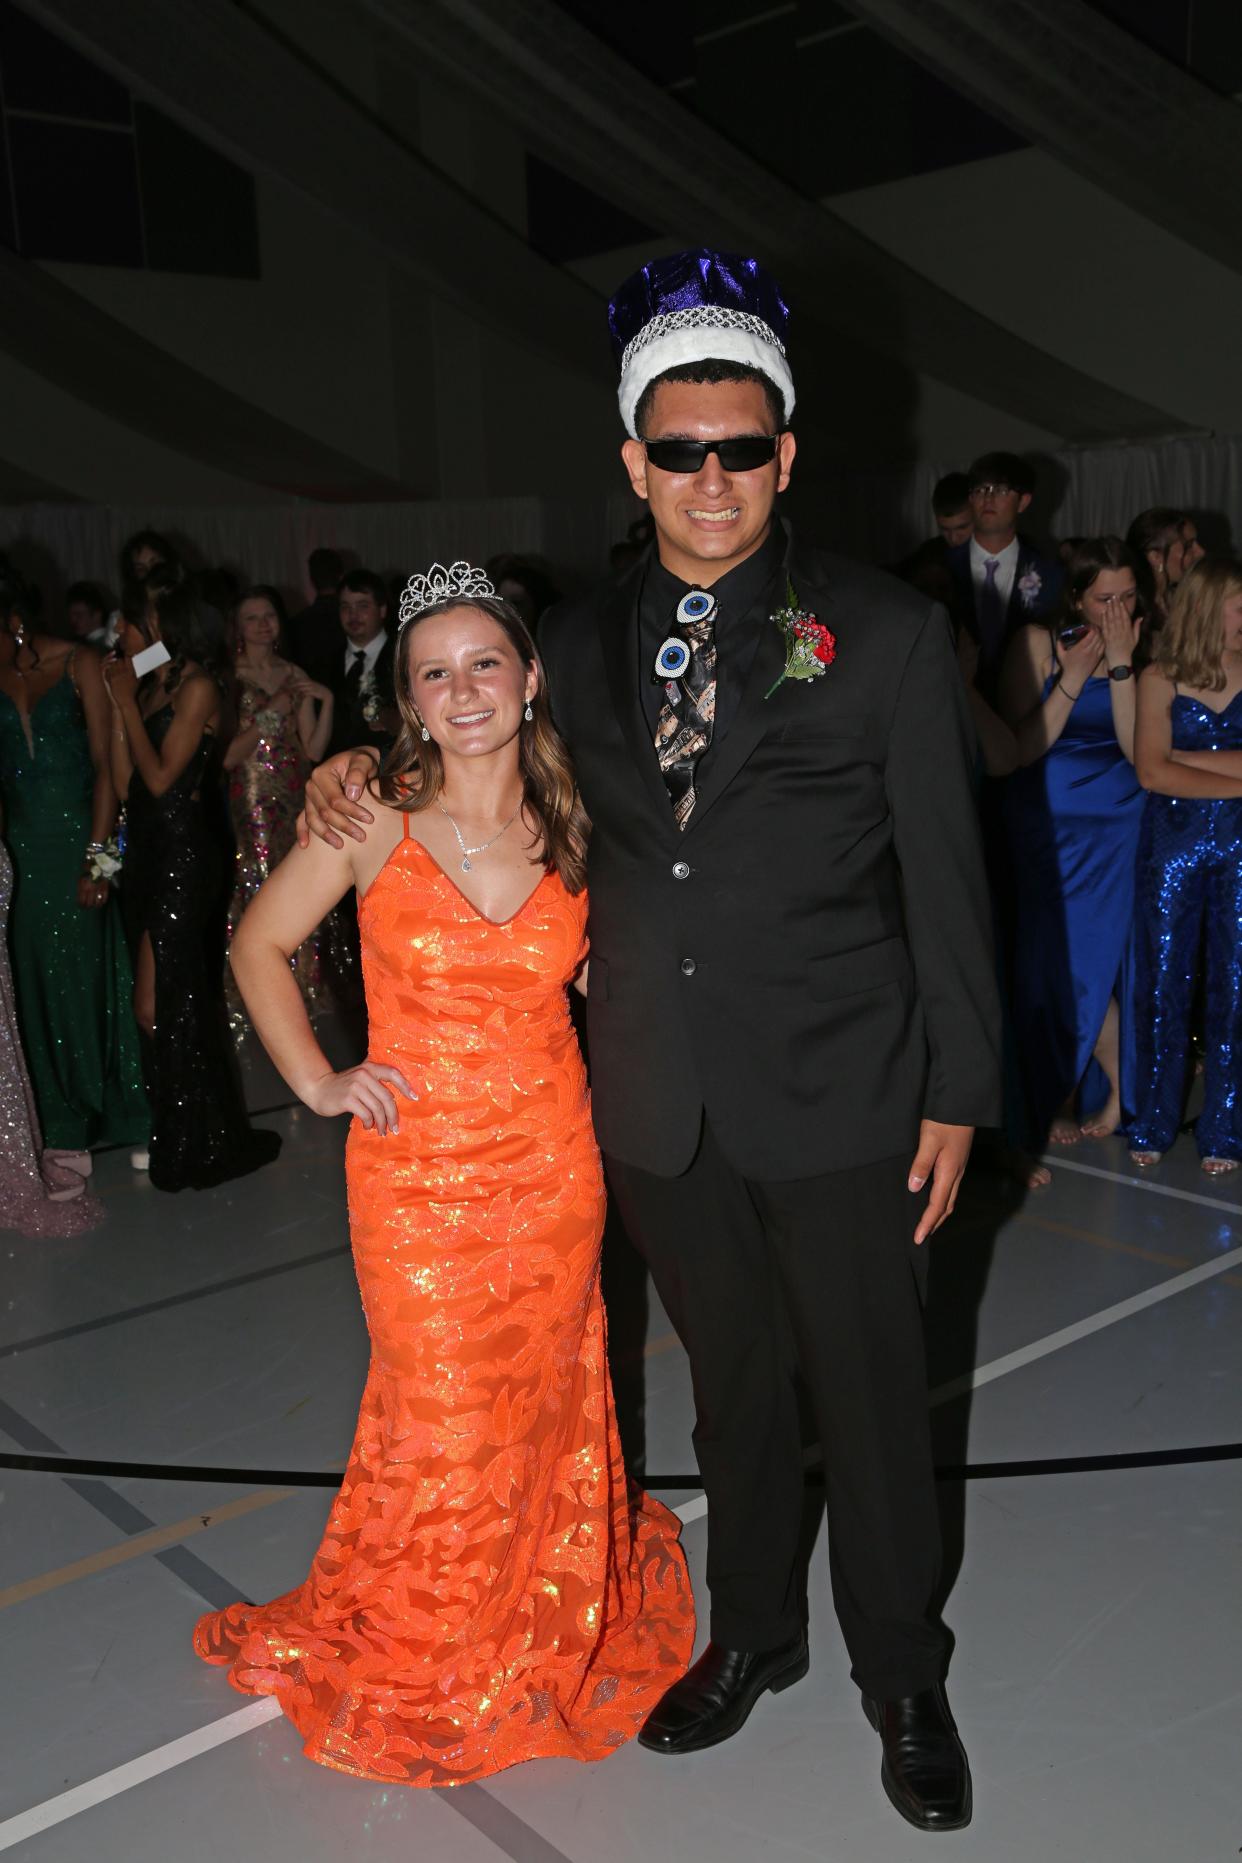 Queen Ella Warner and King Decedrick Duman II were crowned at the 2024 Ross prom on May 4, at the high school.